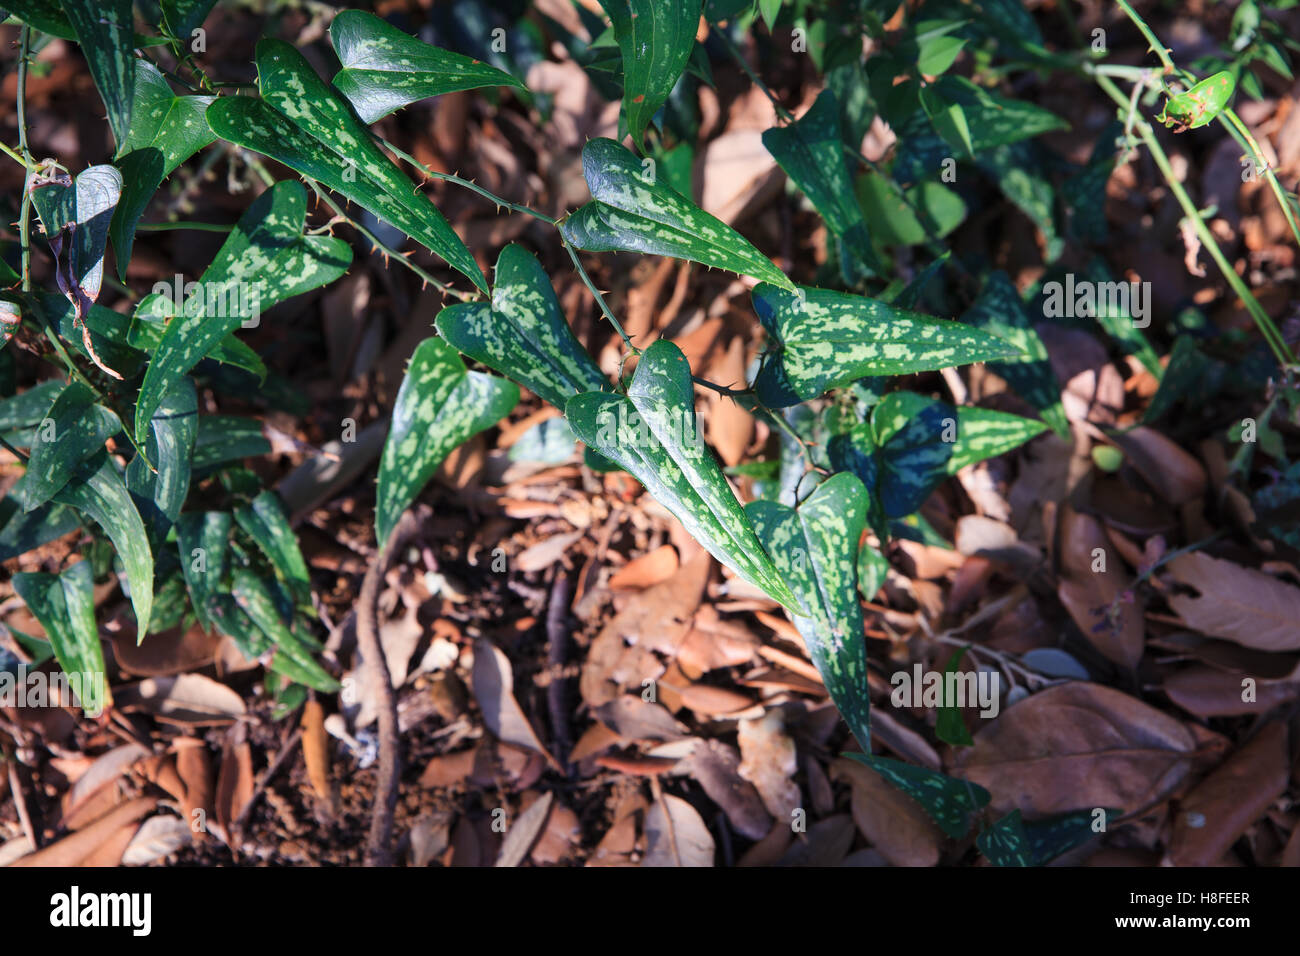 Smilax aspera  is a species of flowering vine in the greenbriar family. Stock Photo